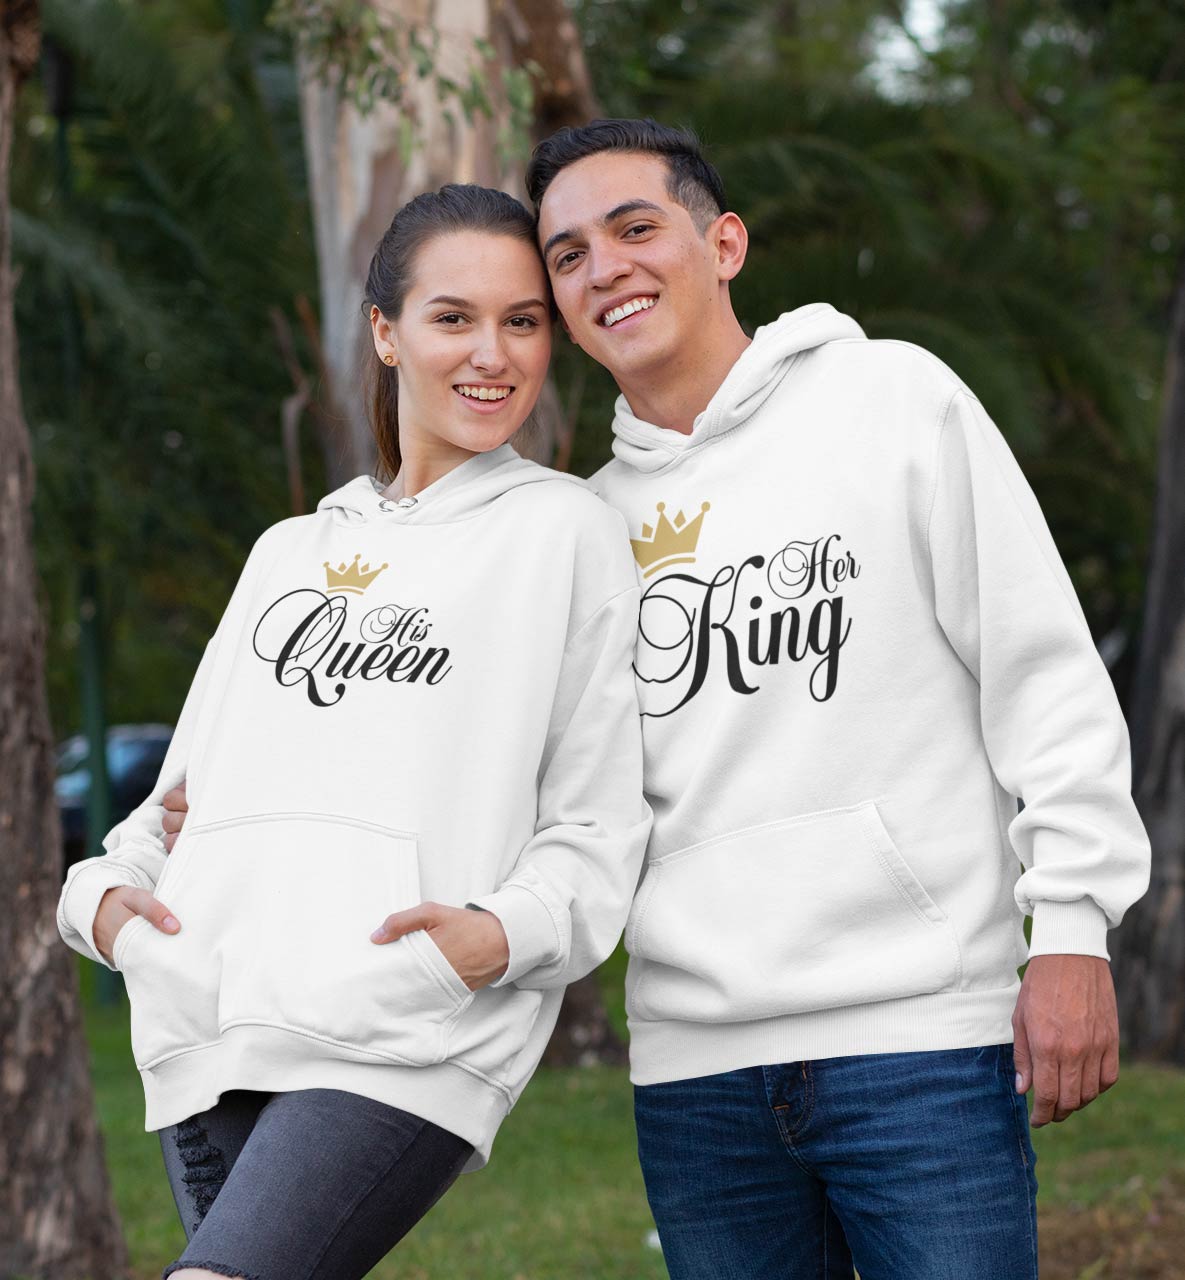 25 Matching Couples Gifts That Are Cute, Cheesy, And Maybe A Little Crazy